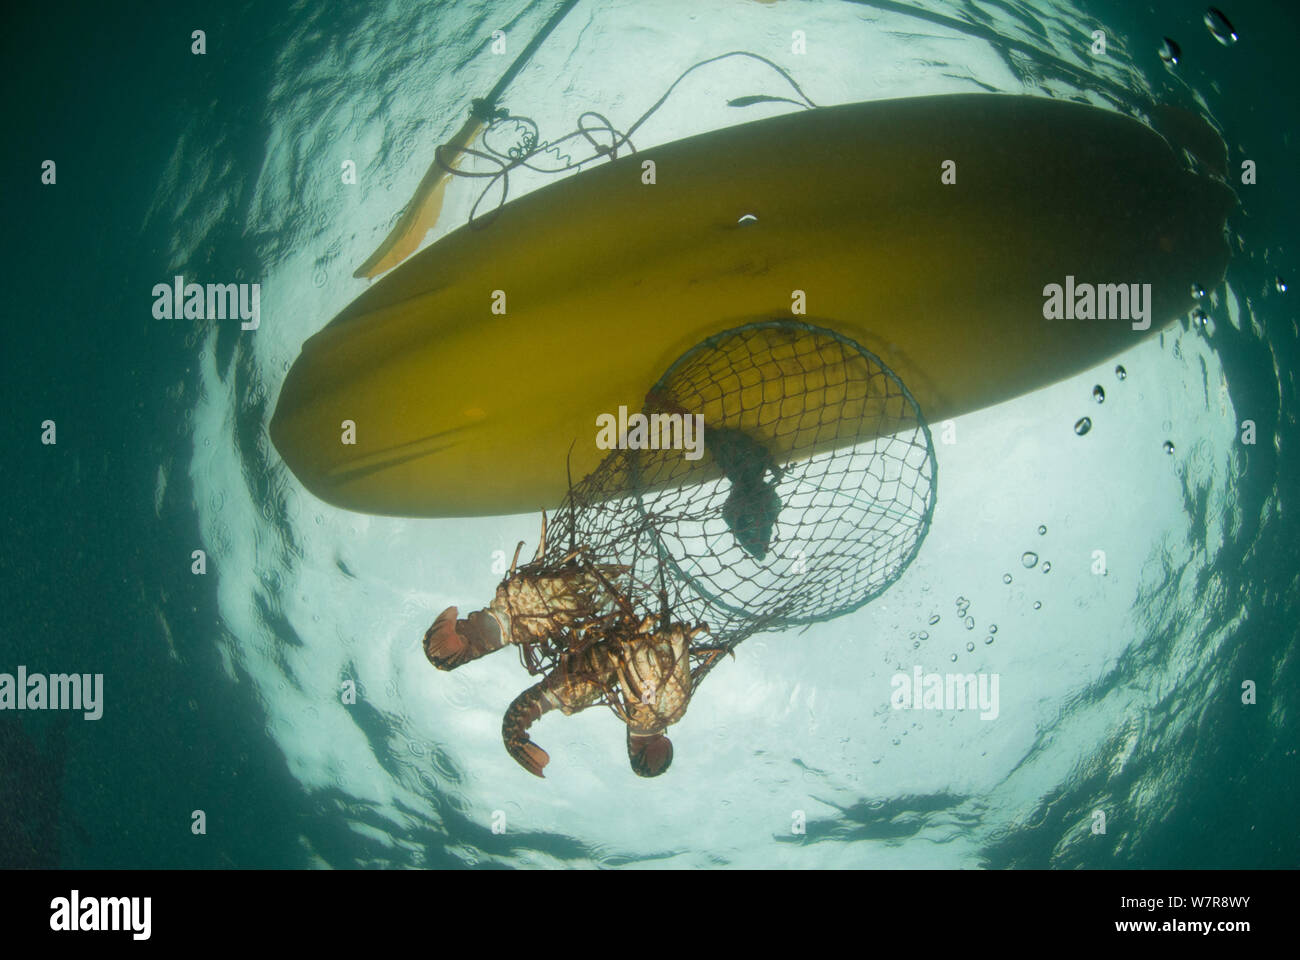 https://c8.alamy.com/comp/W7R8WY/a-hoop-net-with-west-coast-rock-lobster-jasus-lalandii-being-pulled-up-in-sea-kayak-for-recreational-fishing-kommetjie-western-cape-south-africa-W7R8WY.jpg